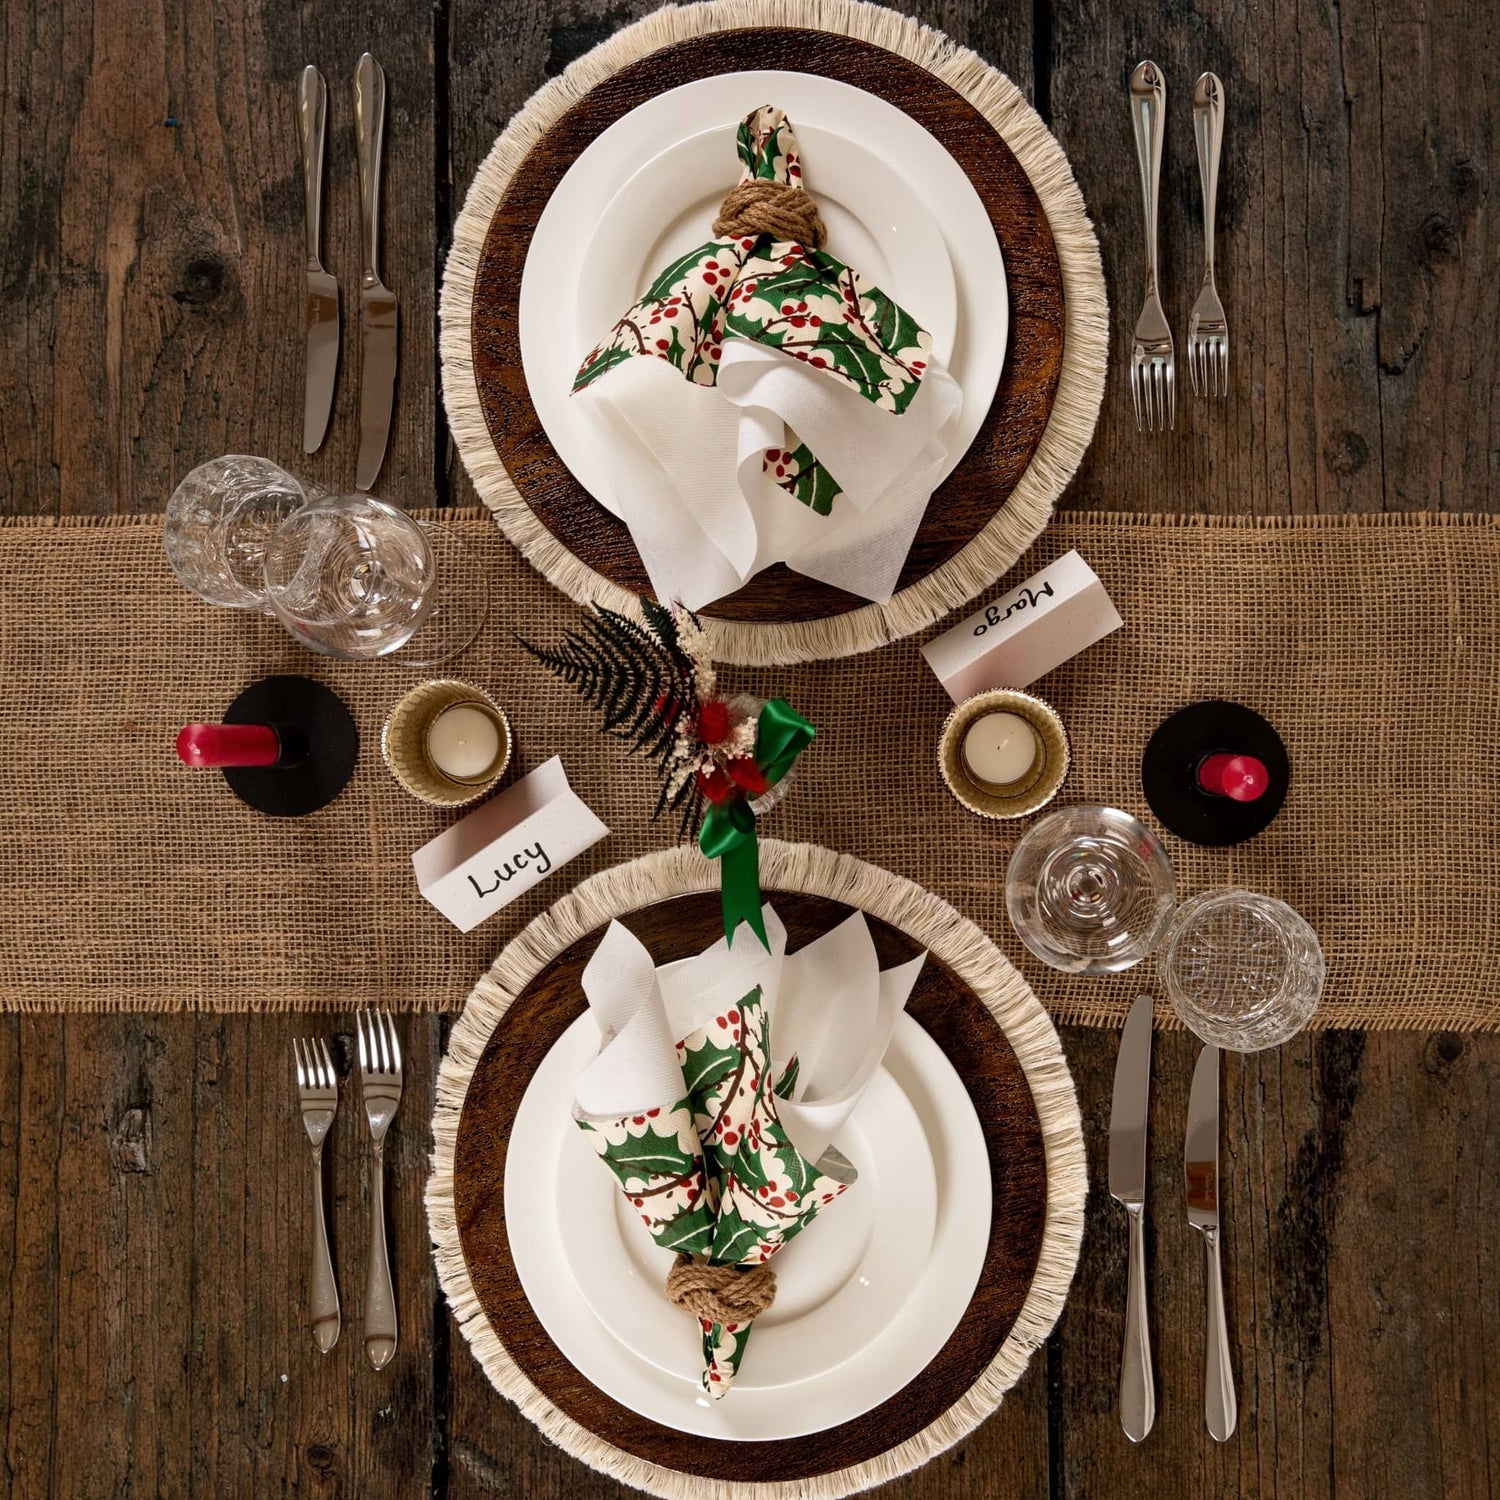 Merry Berry - Rustic Christmas Tablescapes and Tableware